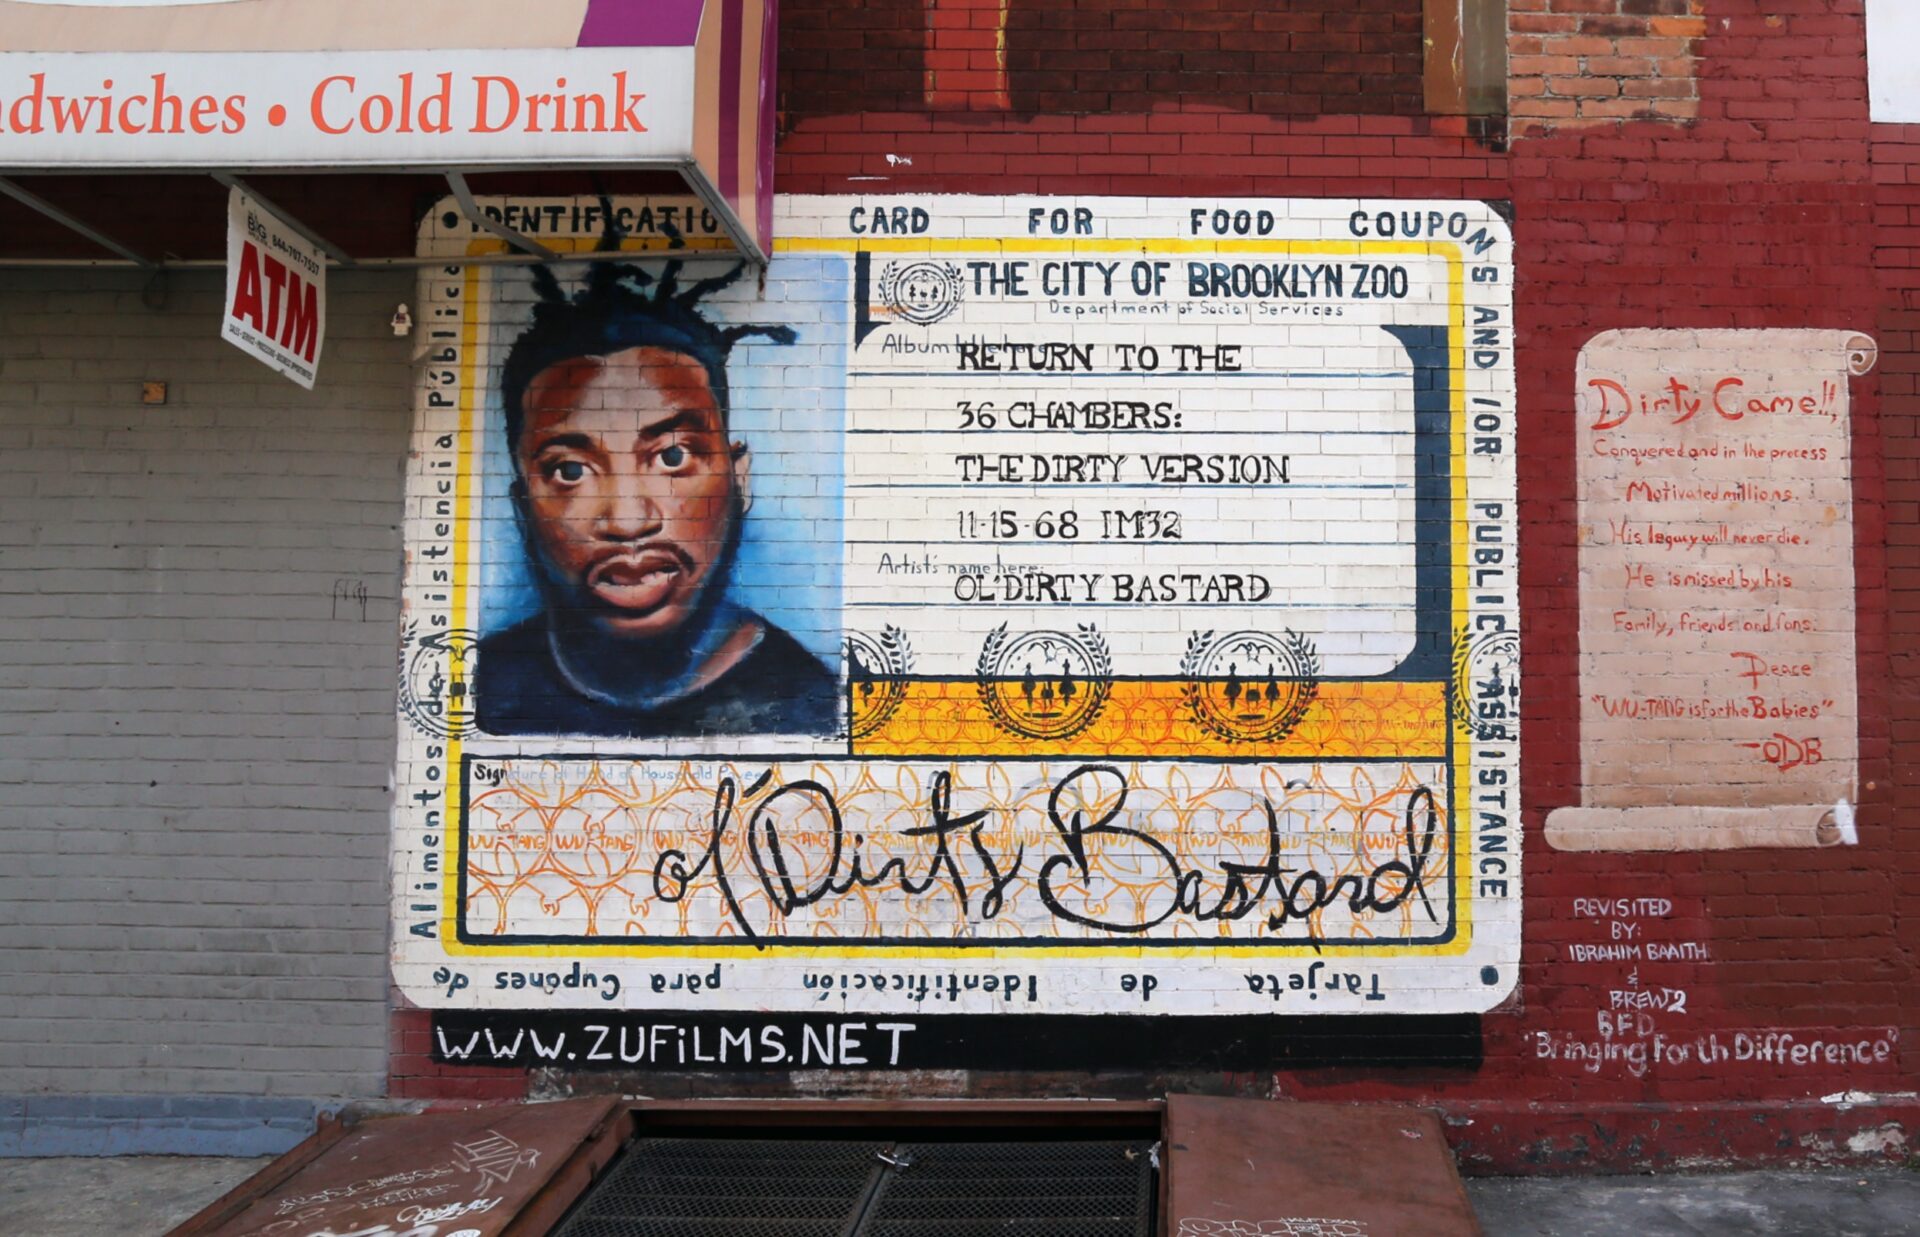 NYC Council Votes to Turn Nov. 15 into Ol’ Dirty Bastard Day